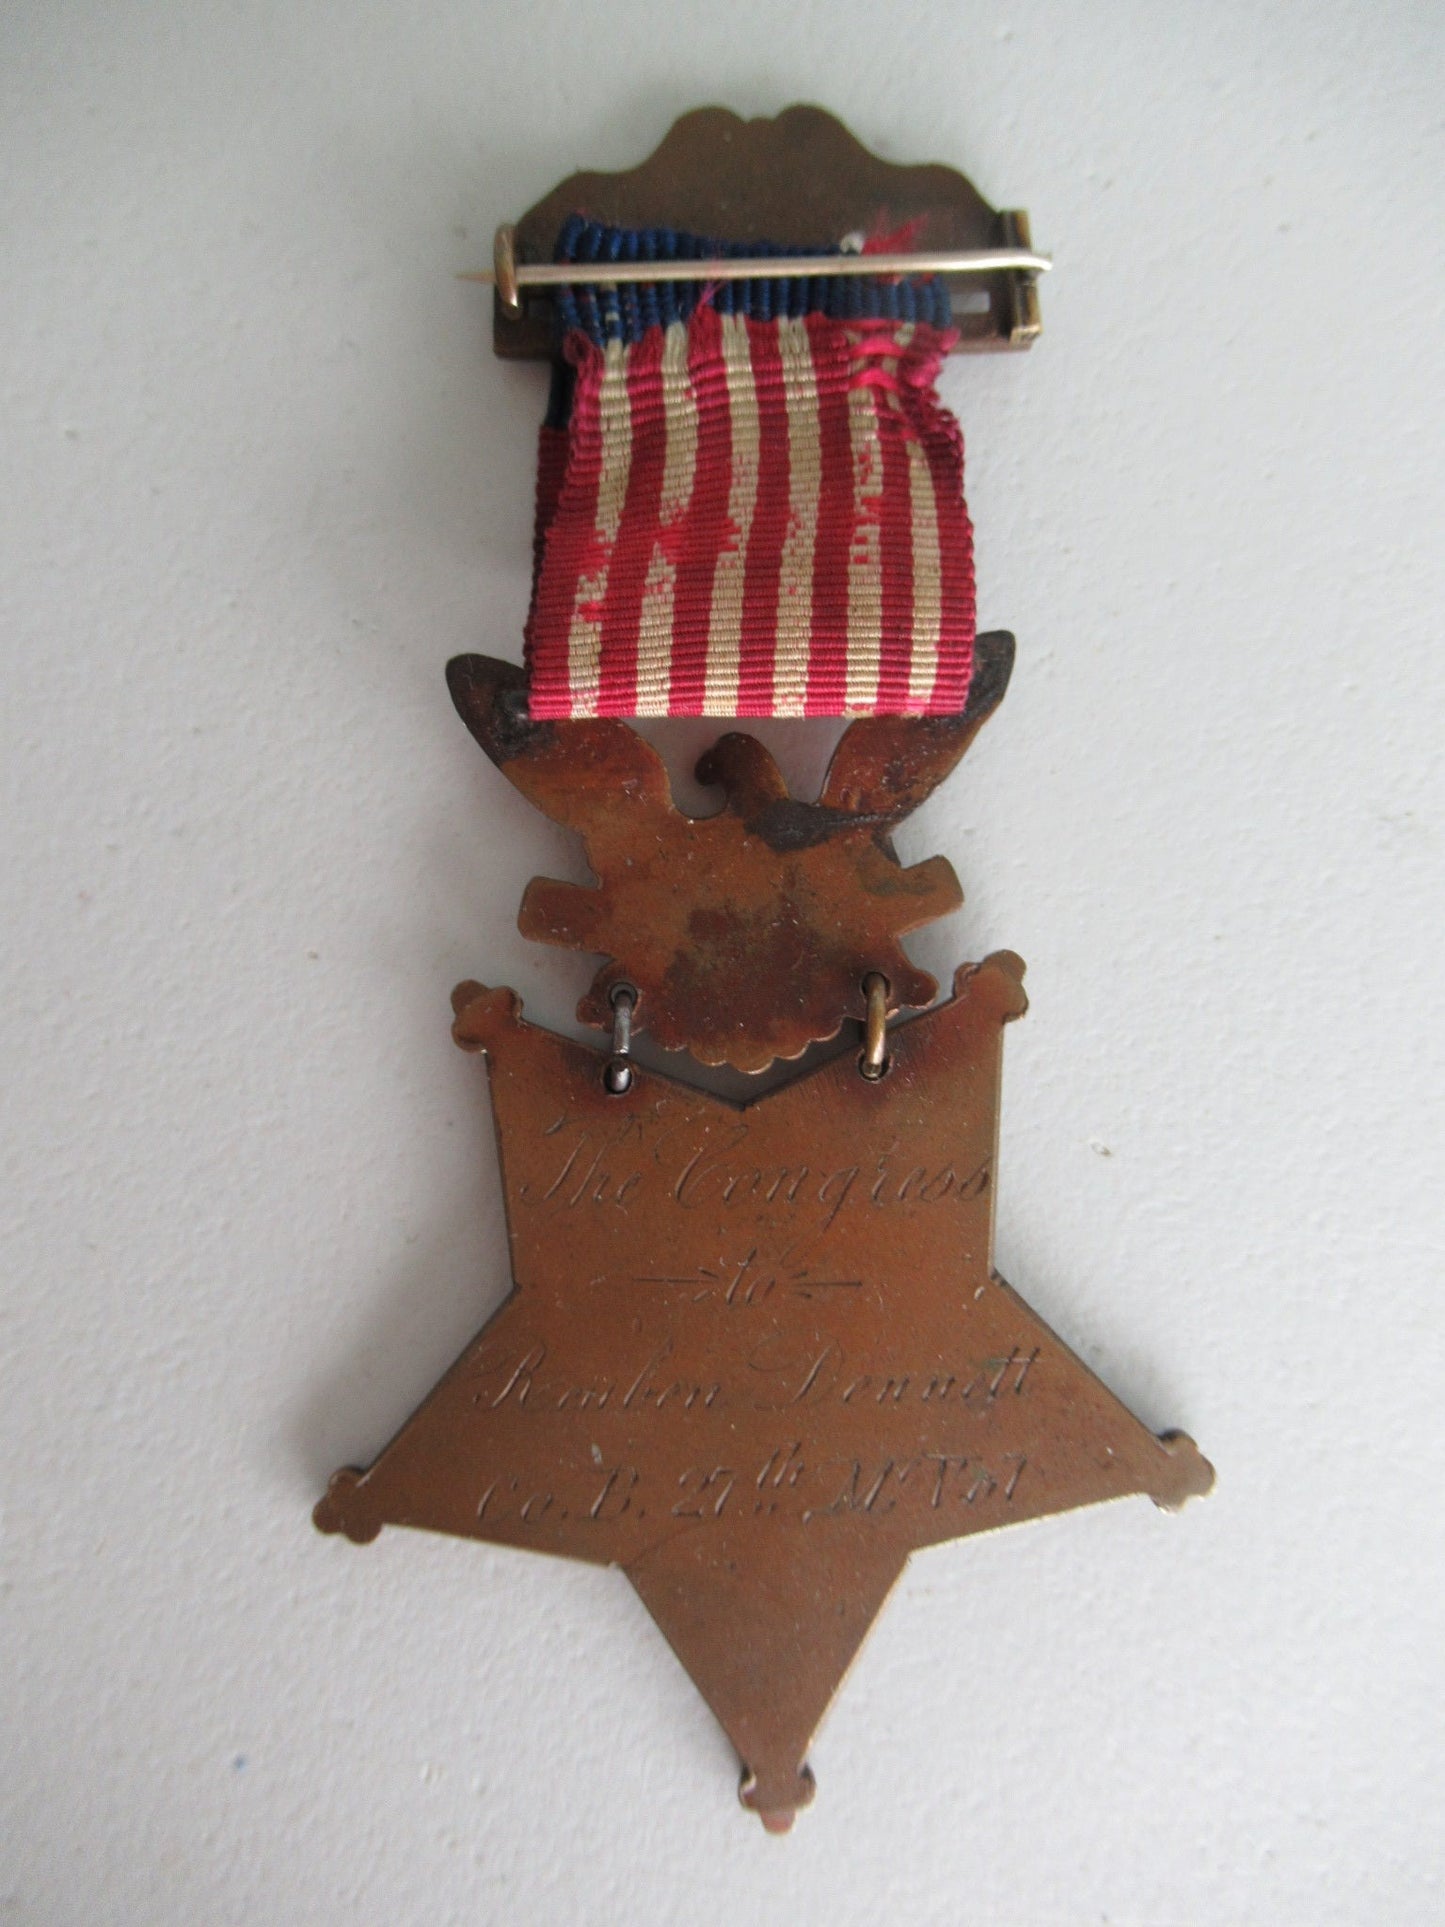 USA MOH MEDAL OF HONOR ARMY MEDAL. TYPE 1. CIVIL WAR PERIOD. Back side